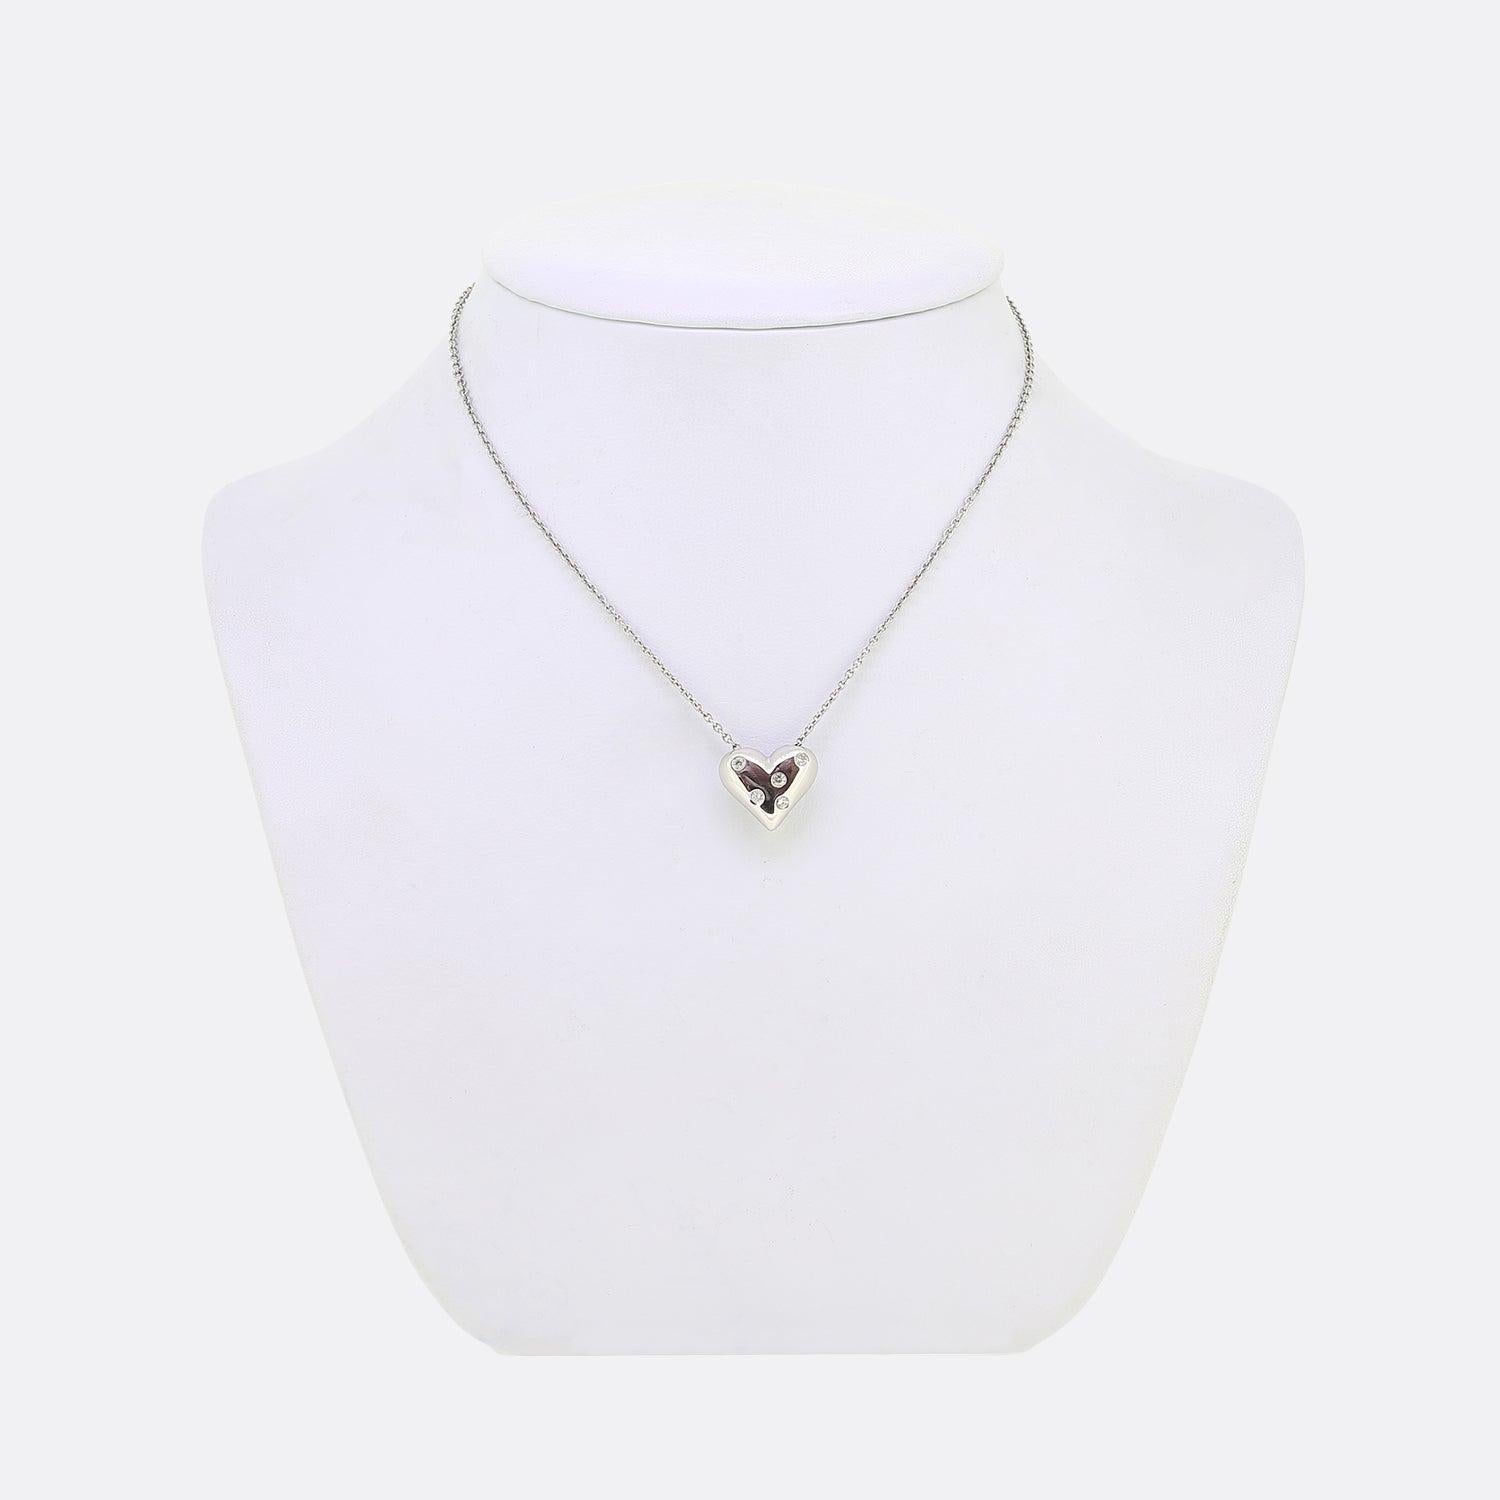 Here we have a lovely necklace from the world renowned luxury jewellery designer Tiffany & Co. This pendant is crafted from platinum into the shape of a love heart and adorned with five ru-over set round brilliant cuts. This pendant hangs from a